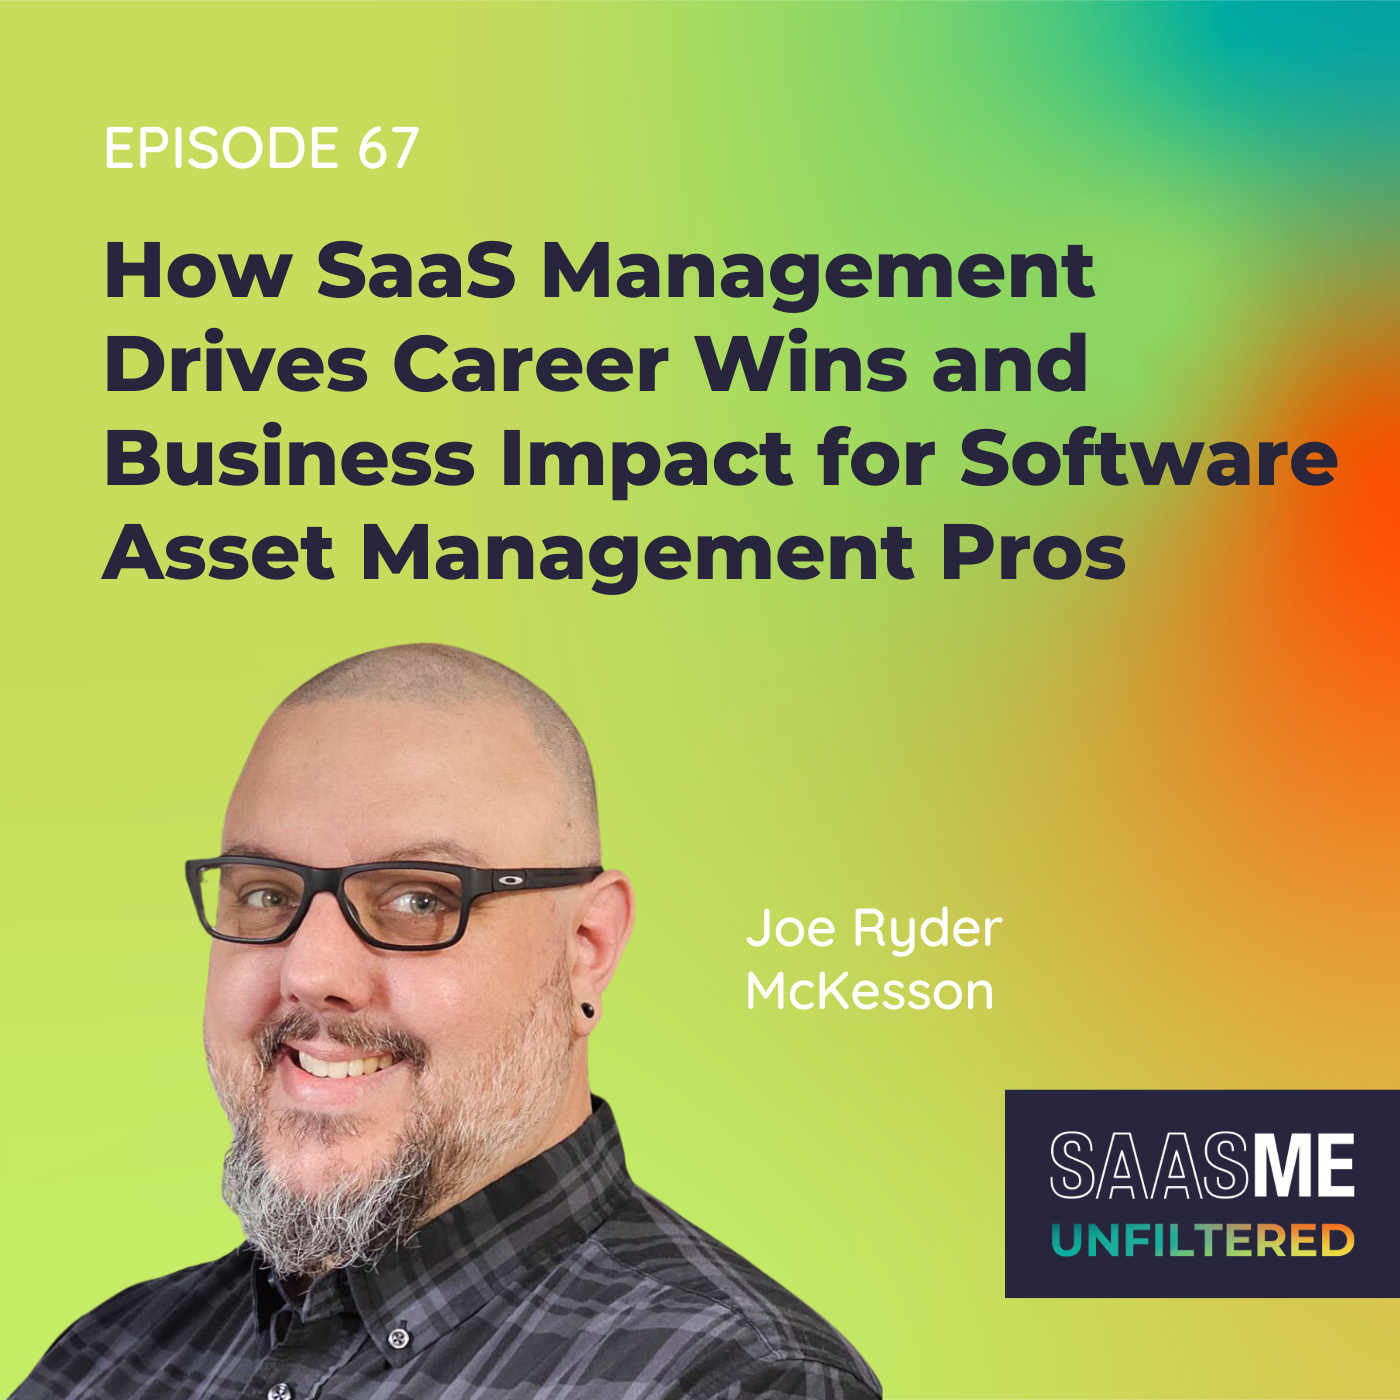 How SaaS Management Drives Career Wins and Business Impact for Software Asset Management Pros with Joe Ryder (McKesson)